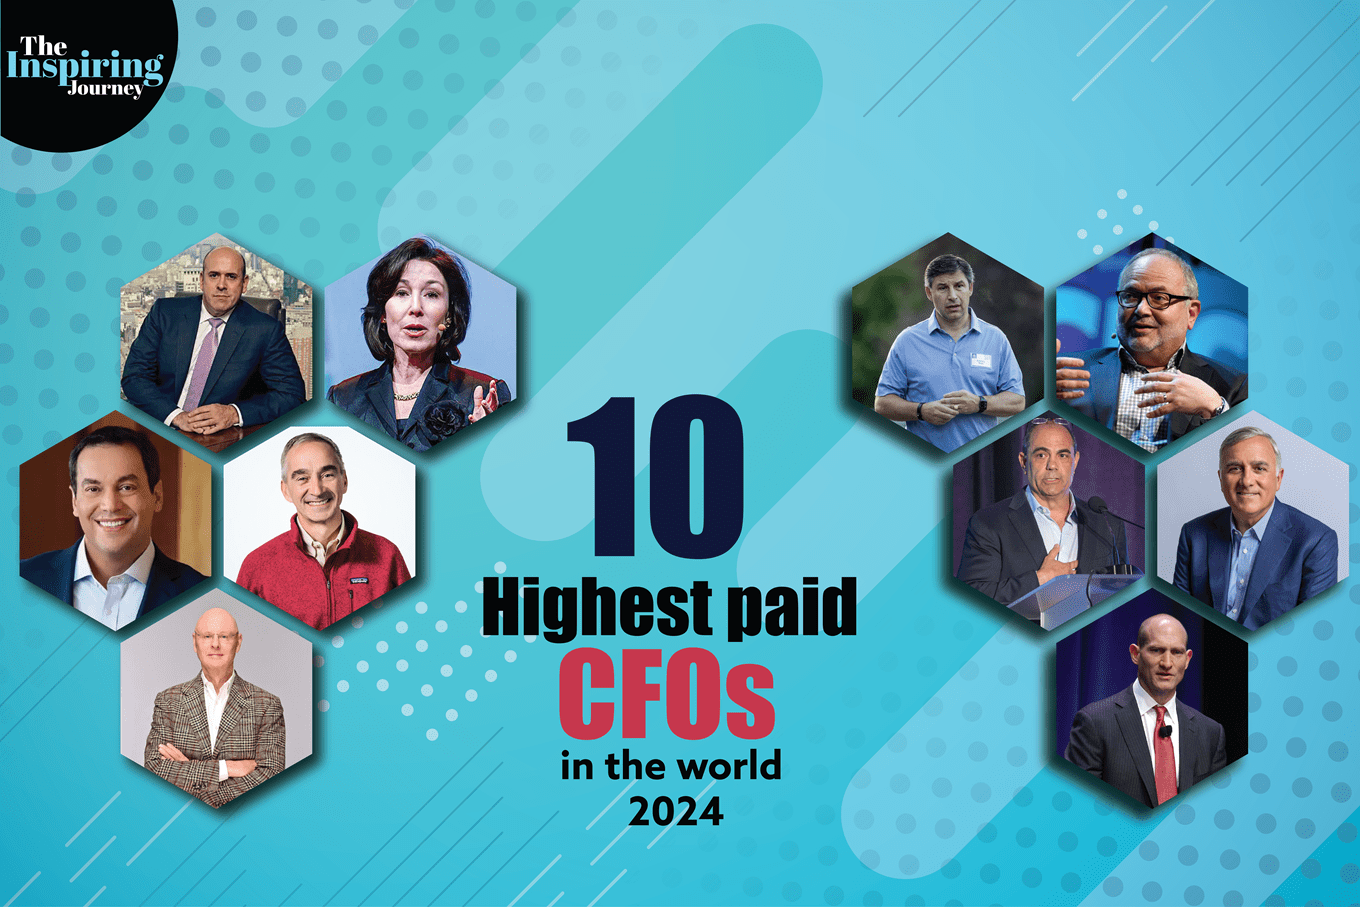 10 Highest paid CFOs in the world 2024